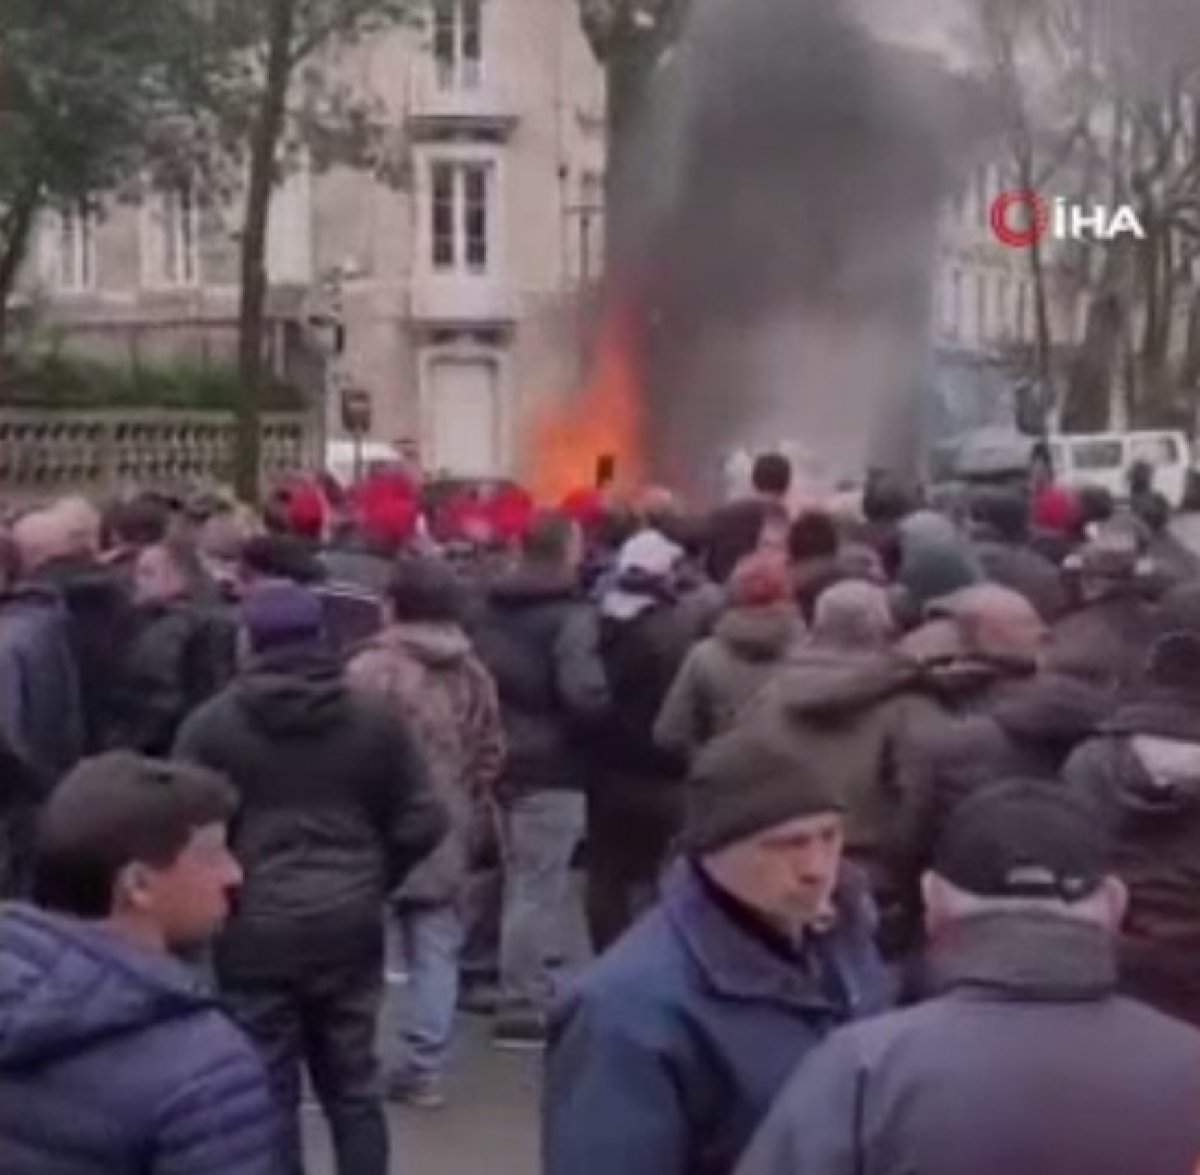 Farmers protest rising fuel prices in France #1